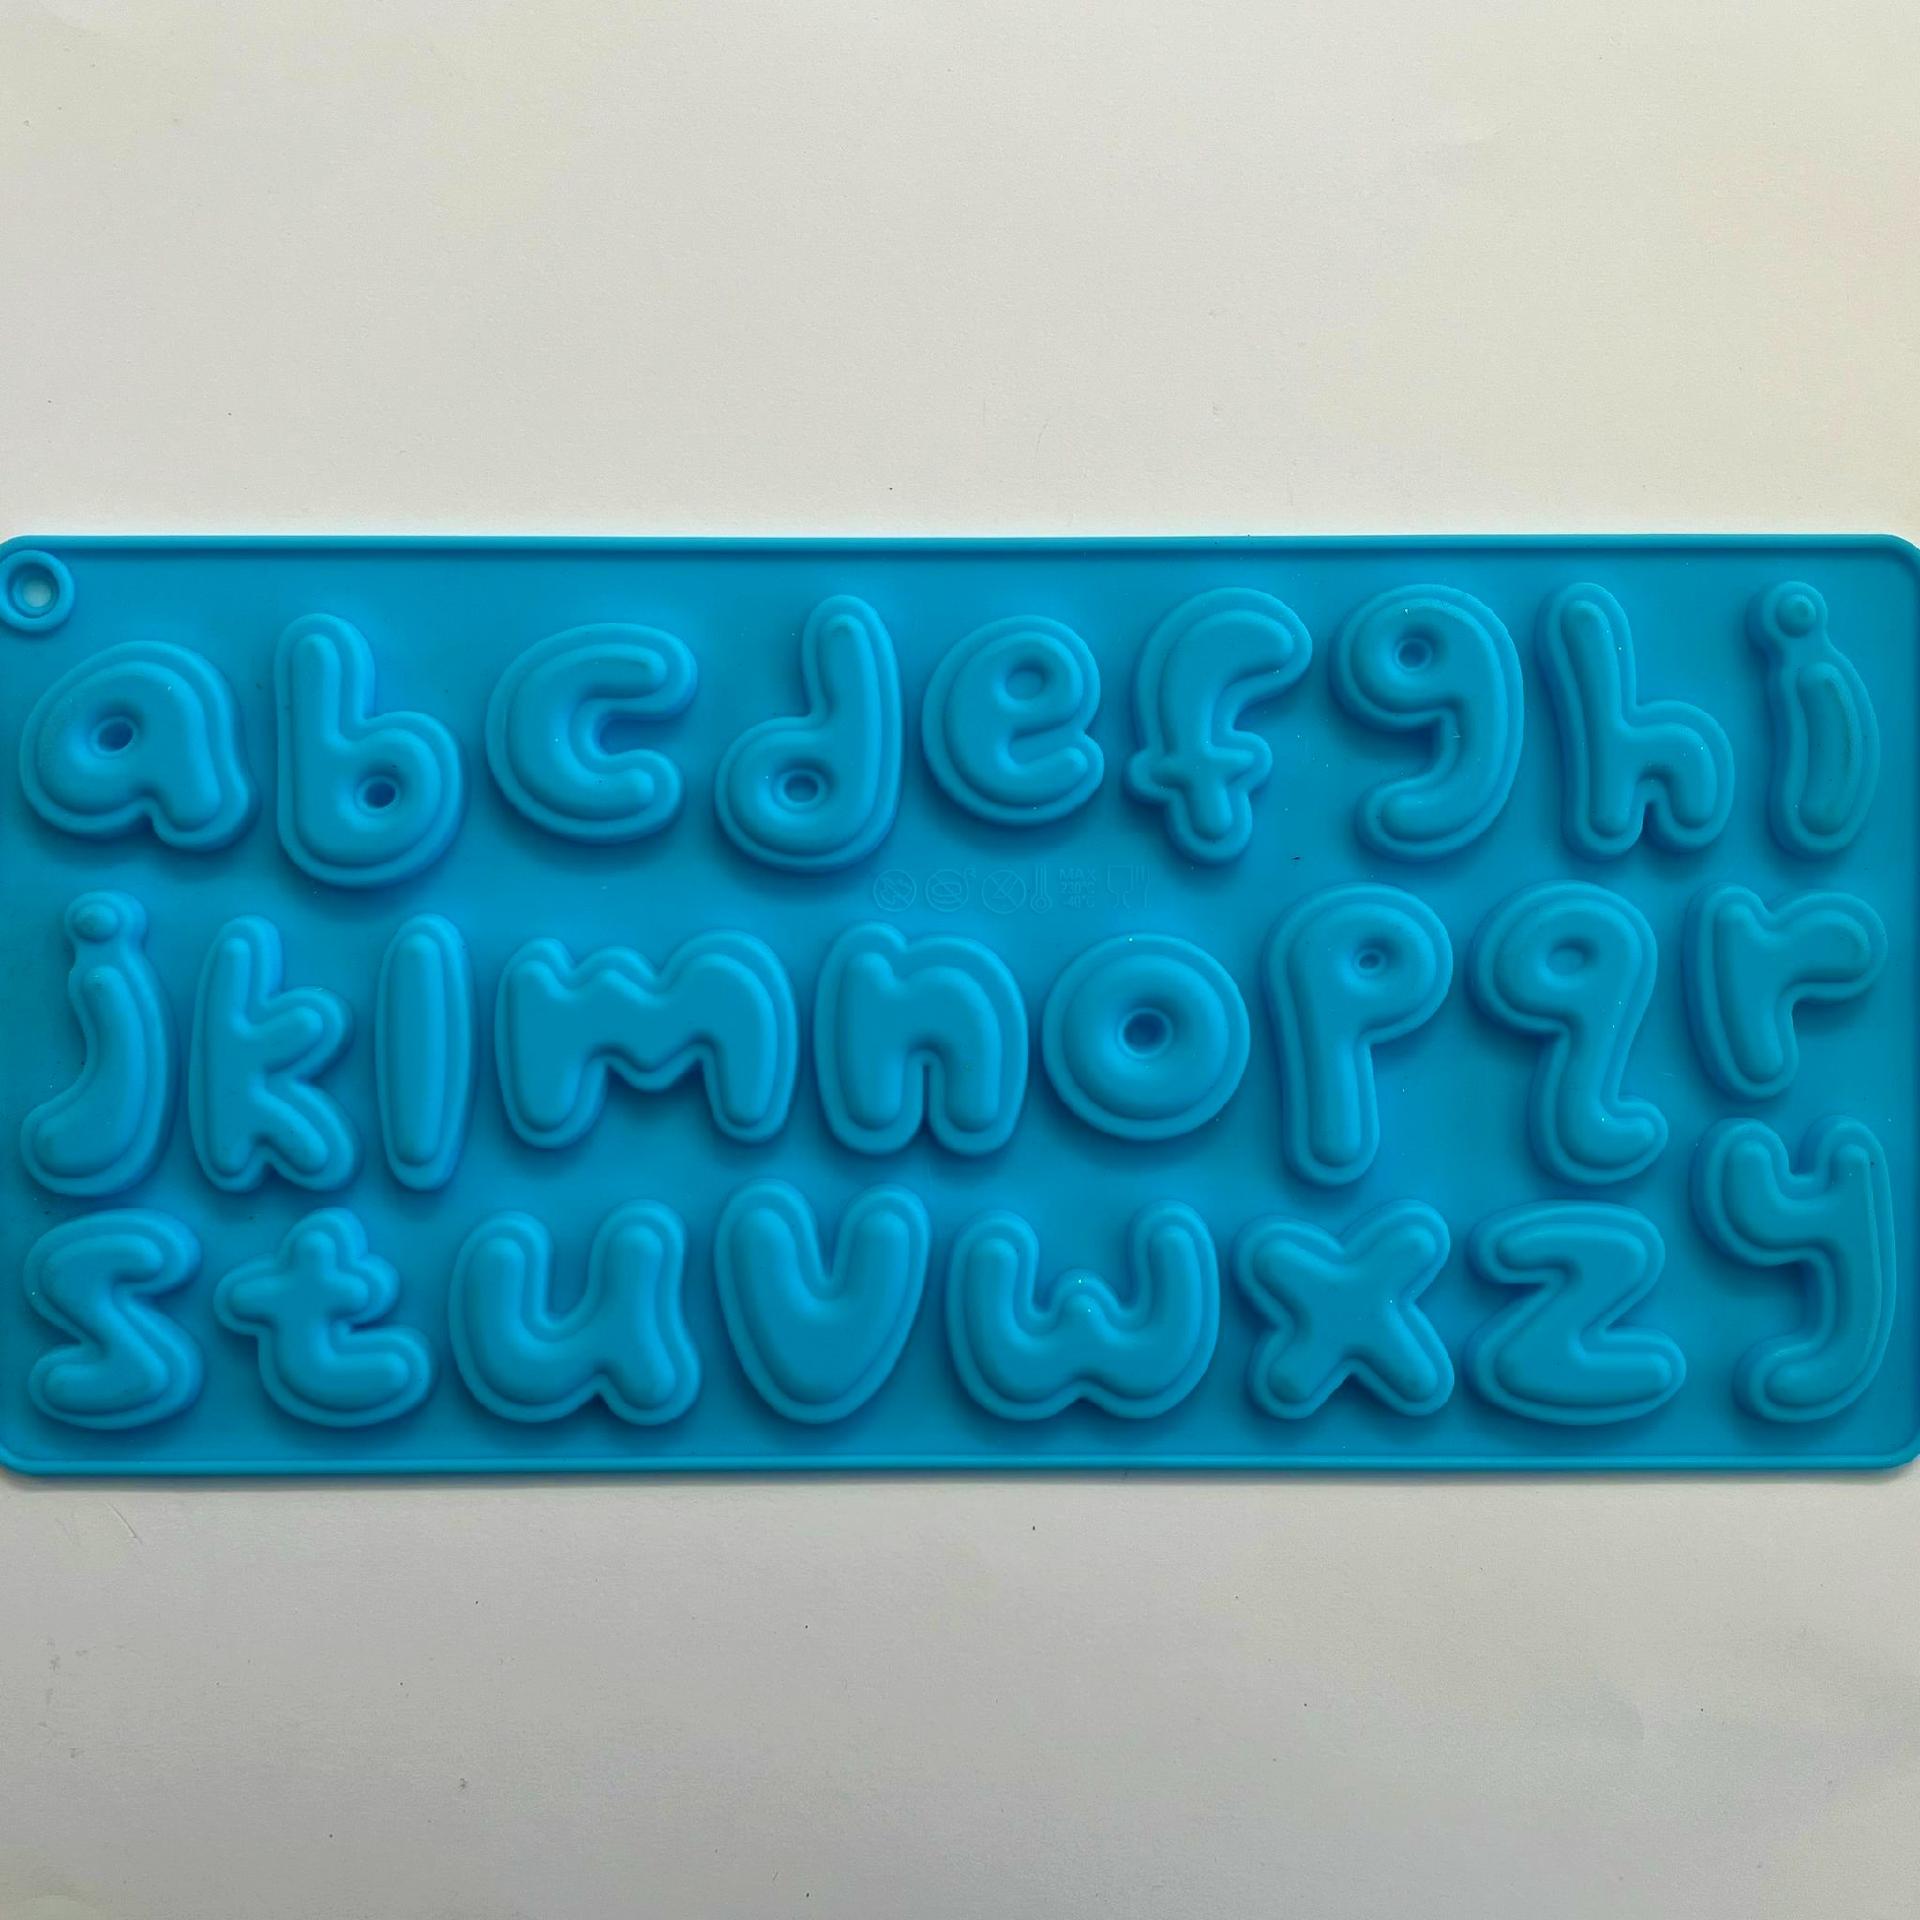 Stampo in silicone - Lettere Hobby Fun 3,5 x 3,5 cm - Bagheria (Palermo)